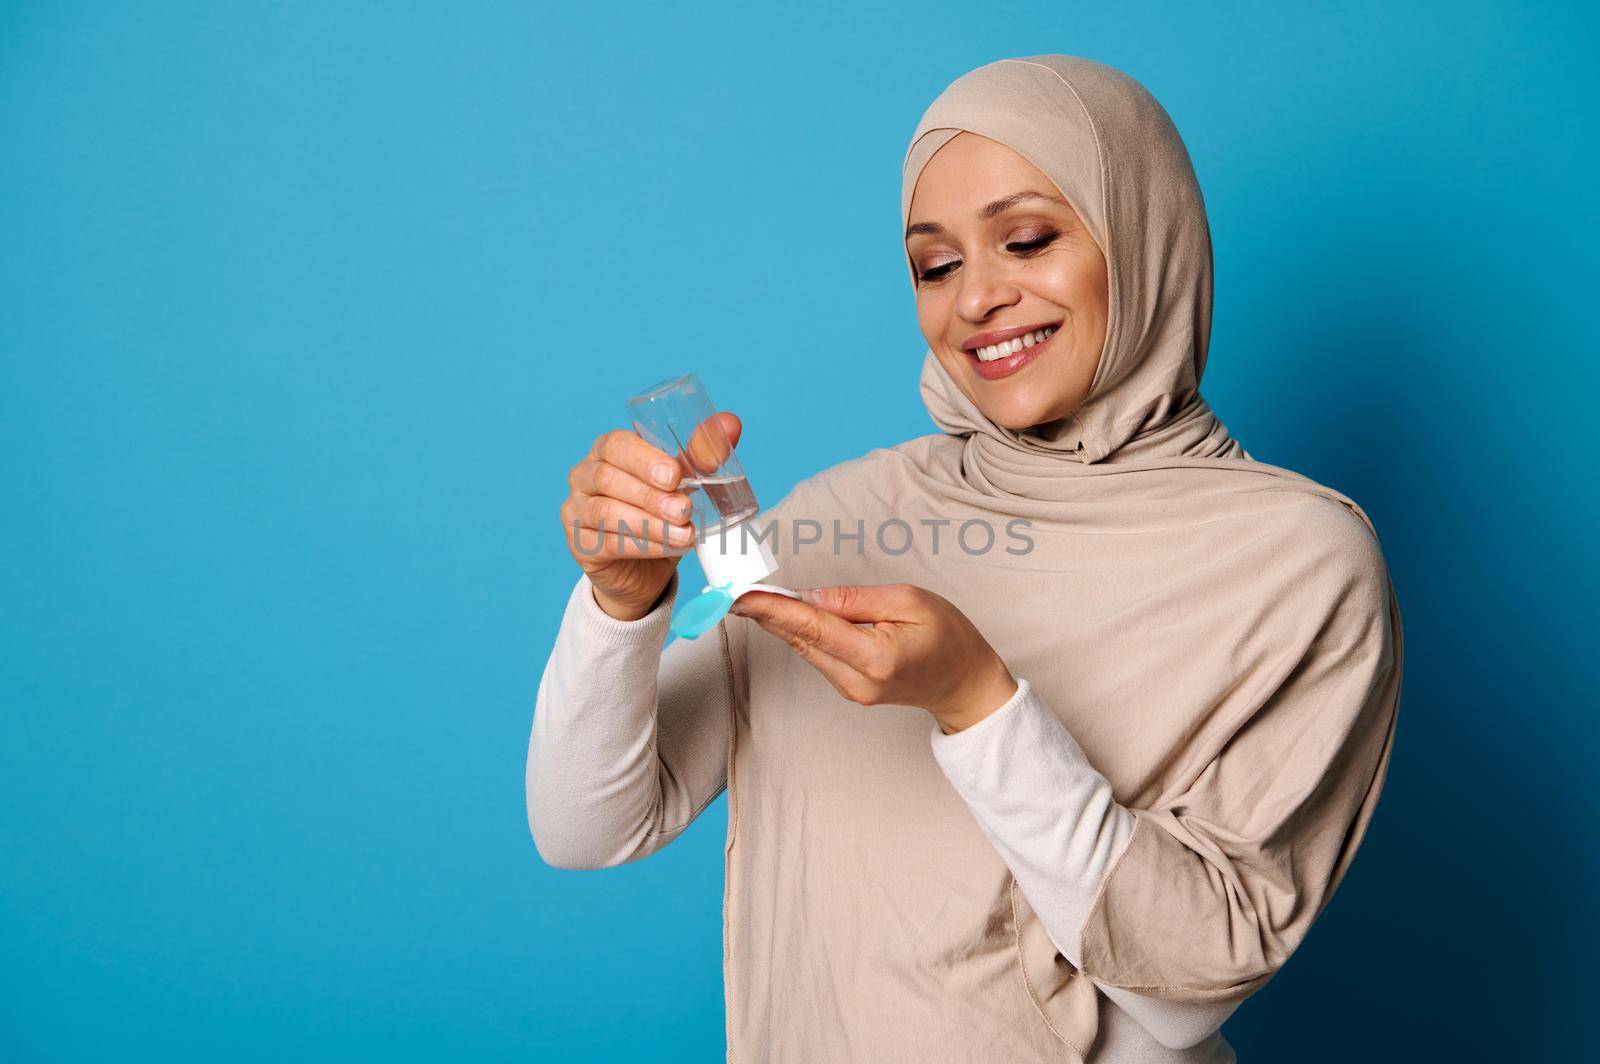 Smiling muslim woman wearing beige hijab applying micellar makeup lotion to cotton pad. Isolated on blue background with copy space